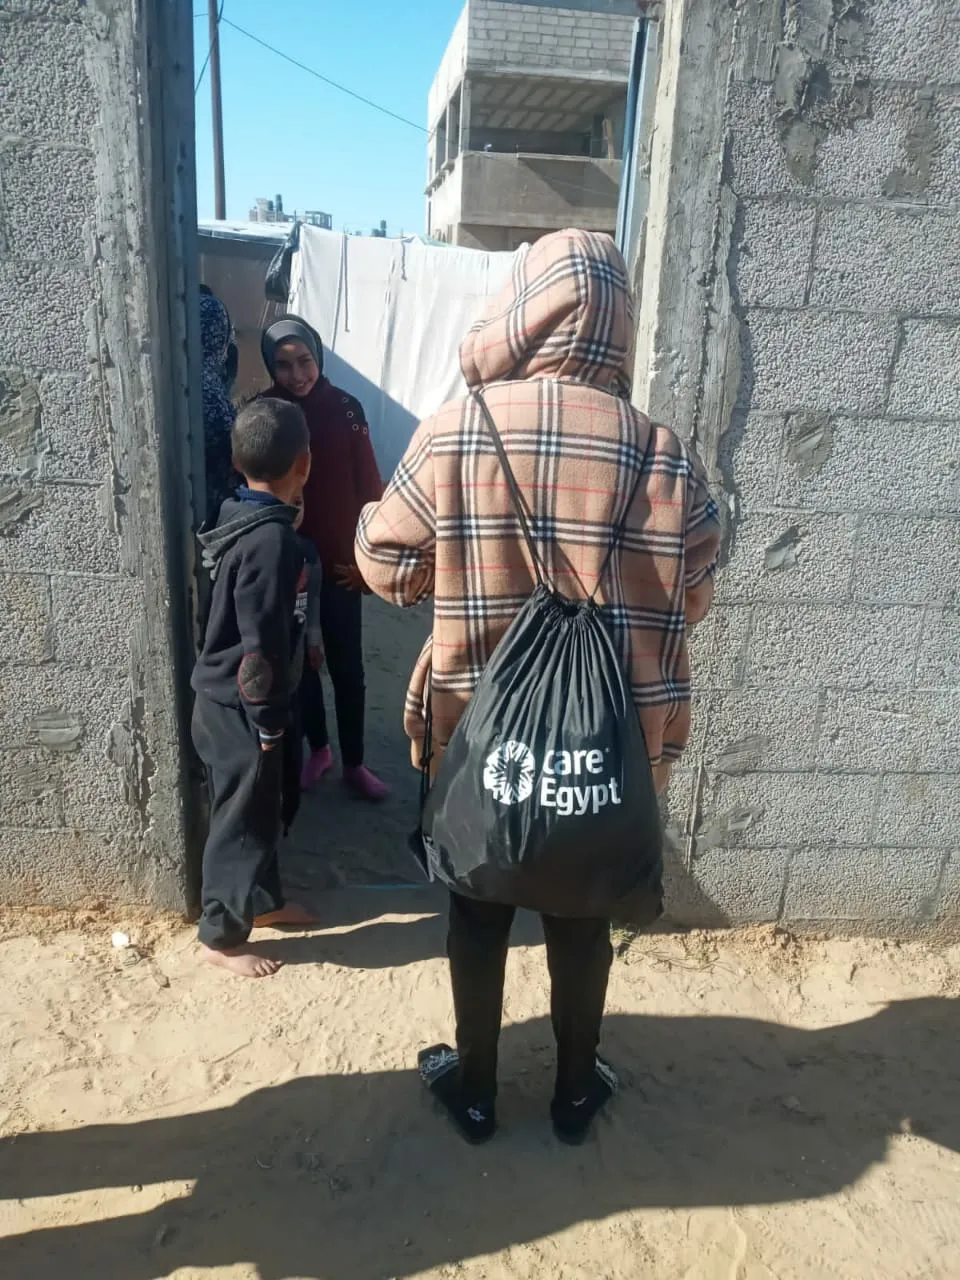 Child, back to camera, carries a bag marked “CARE Egypt,” and talks to other children.